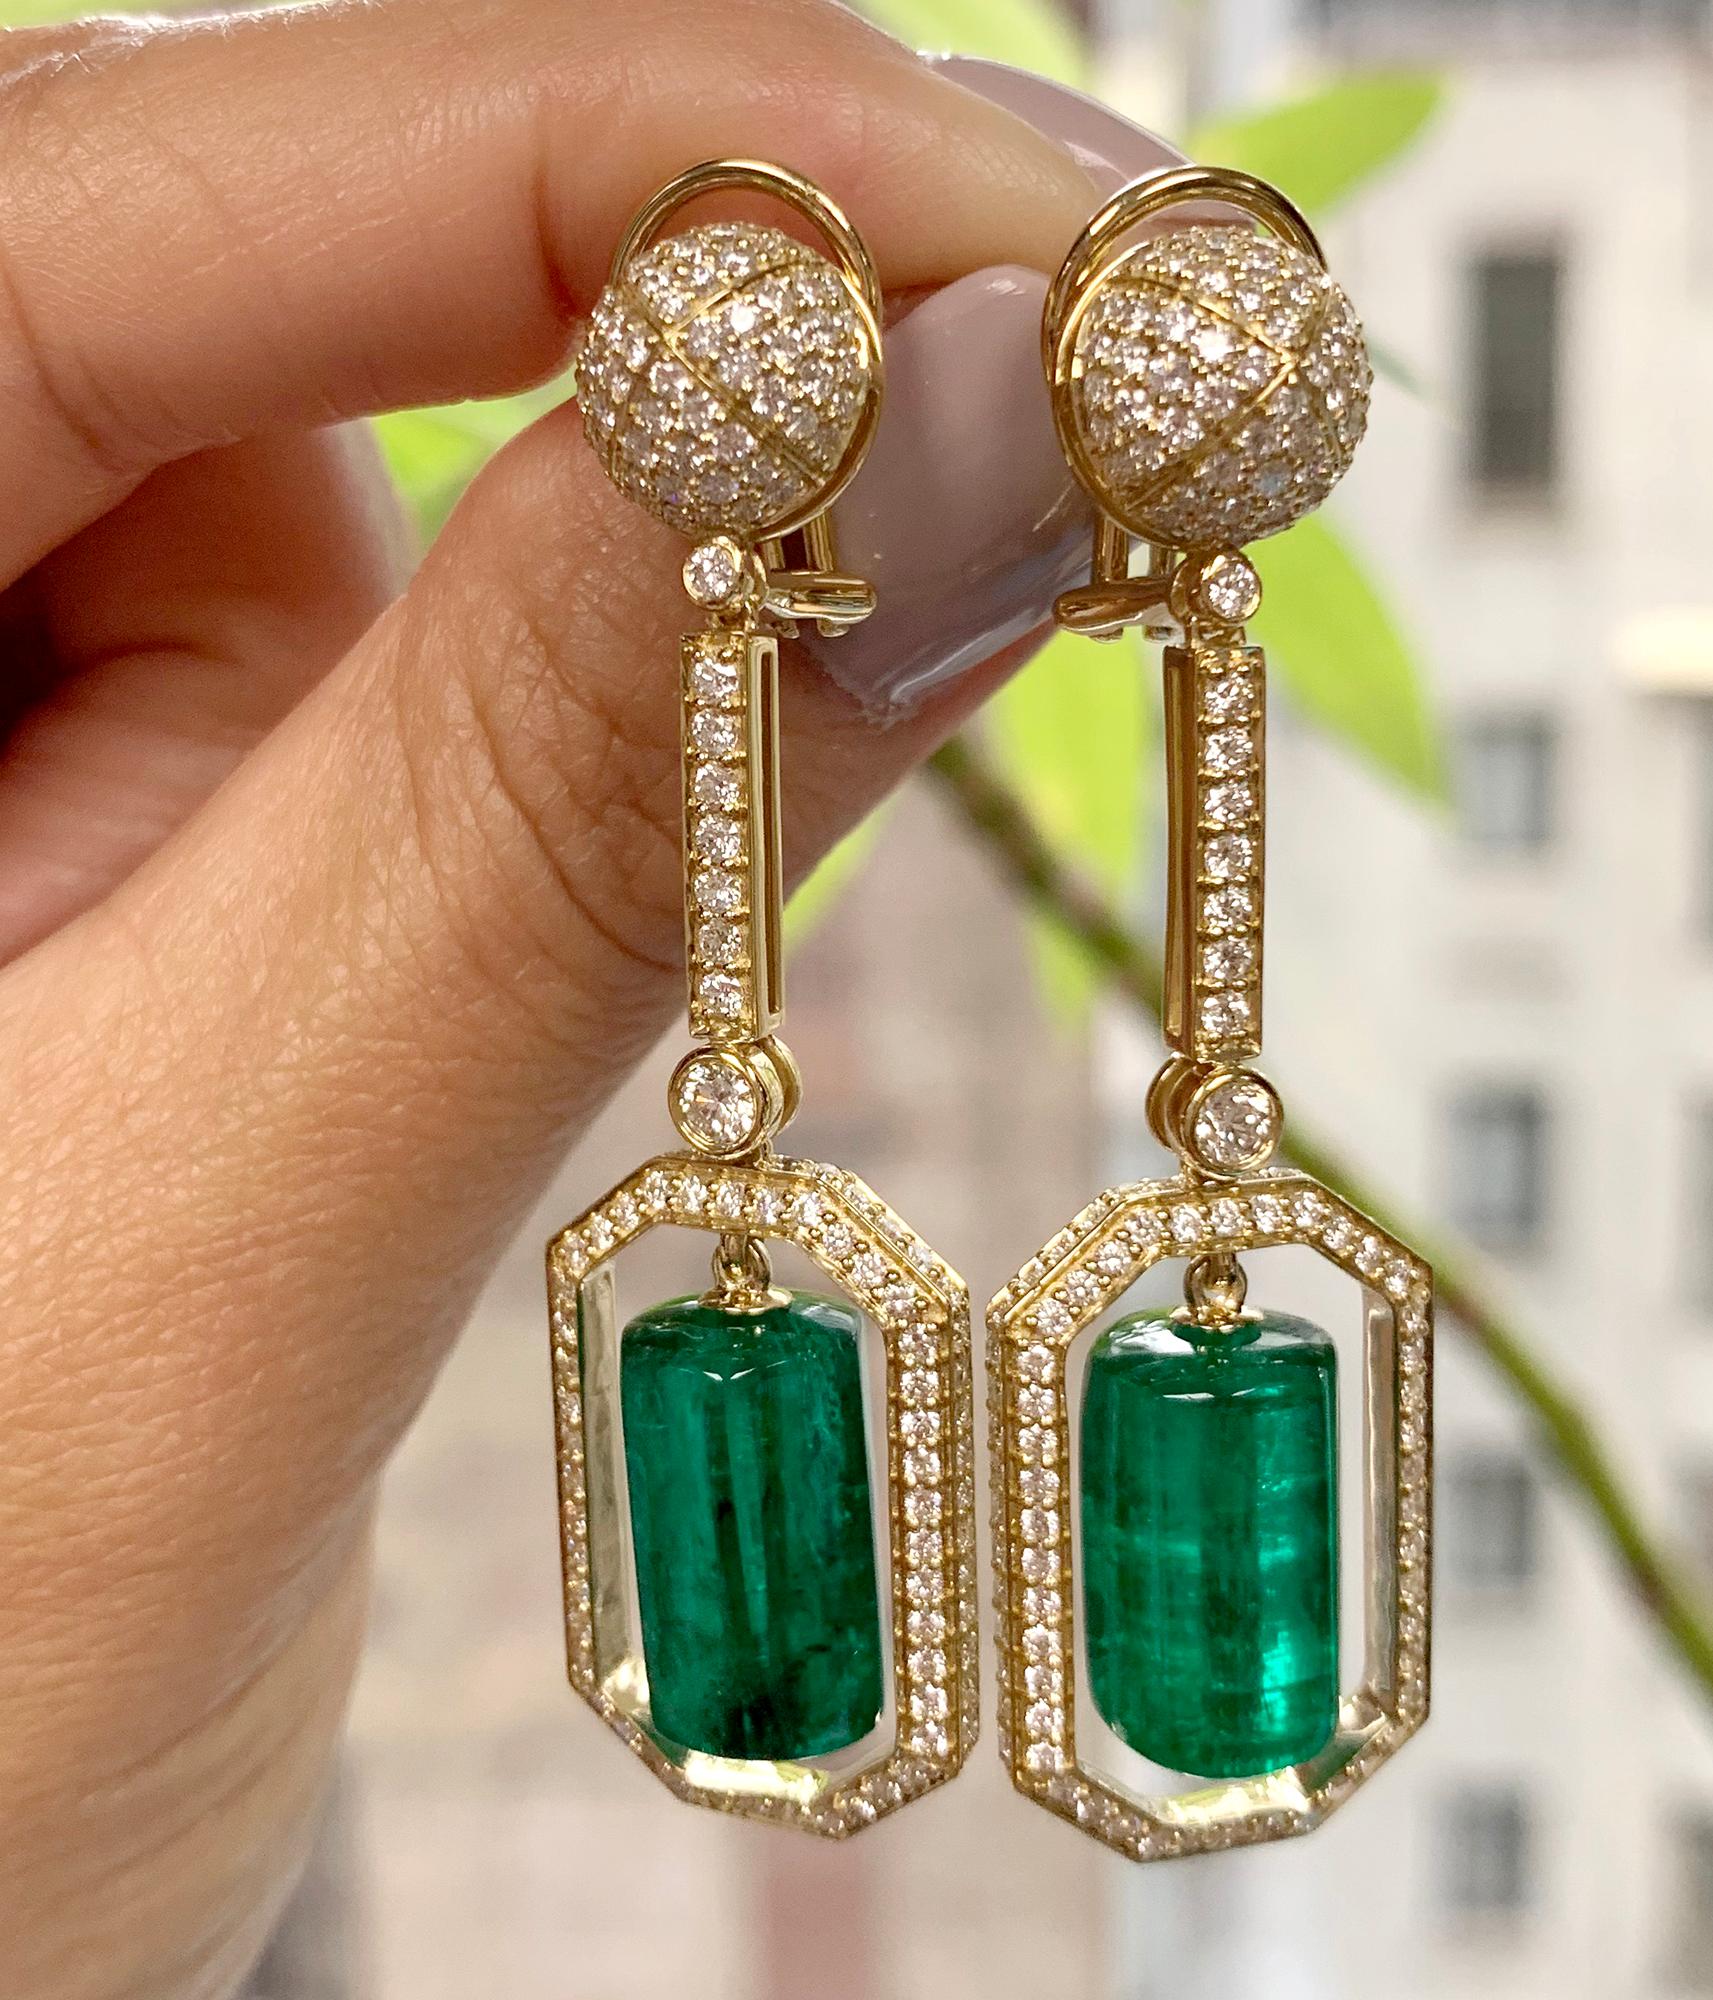 Emerald Drum Shape Tumbled Long Earrings With Diamonds in 18K Yellow Gold, from 'G-One' Collection 

Approx. Wt: 21.95 Carats (Emerald)

Diamonds: G-H / VS, Approx. Wt: 2.91 Carats